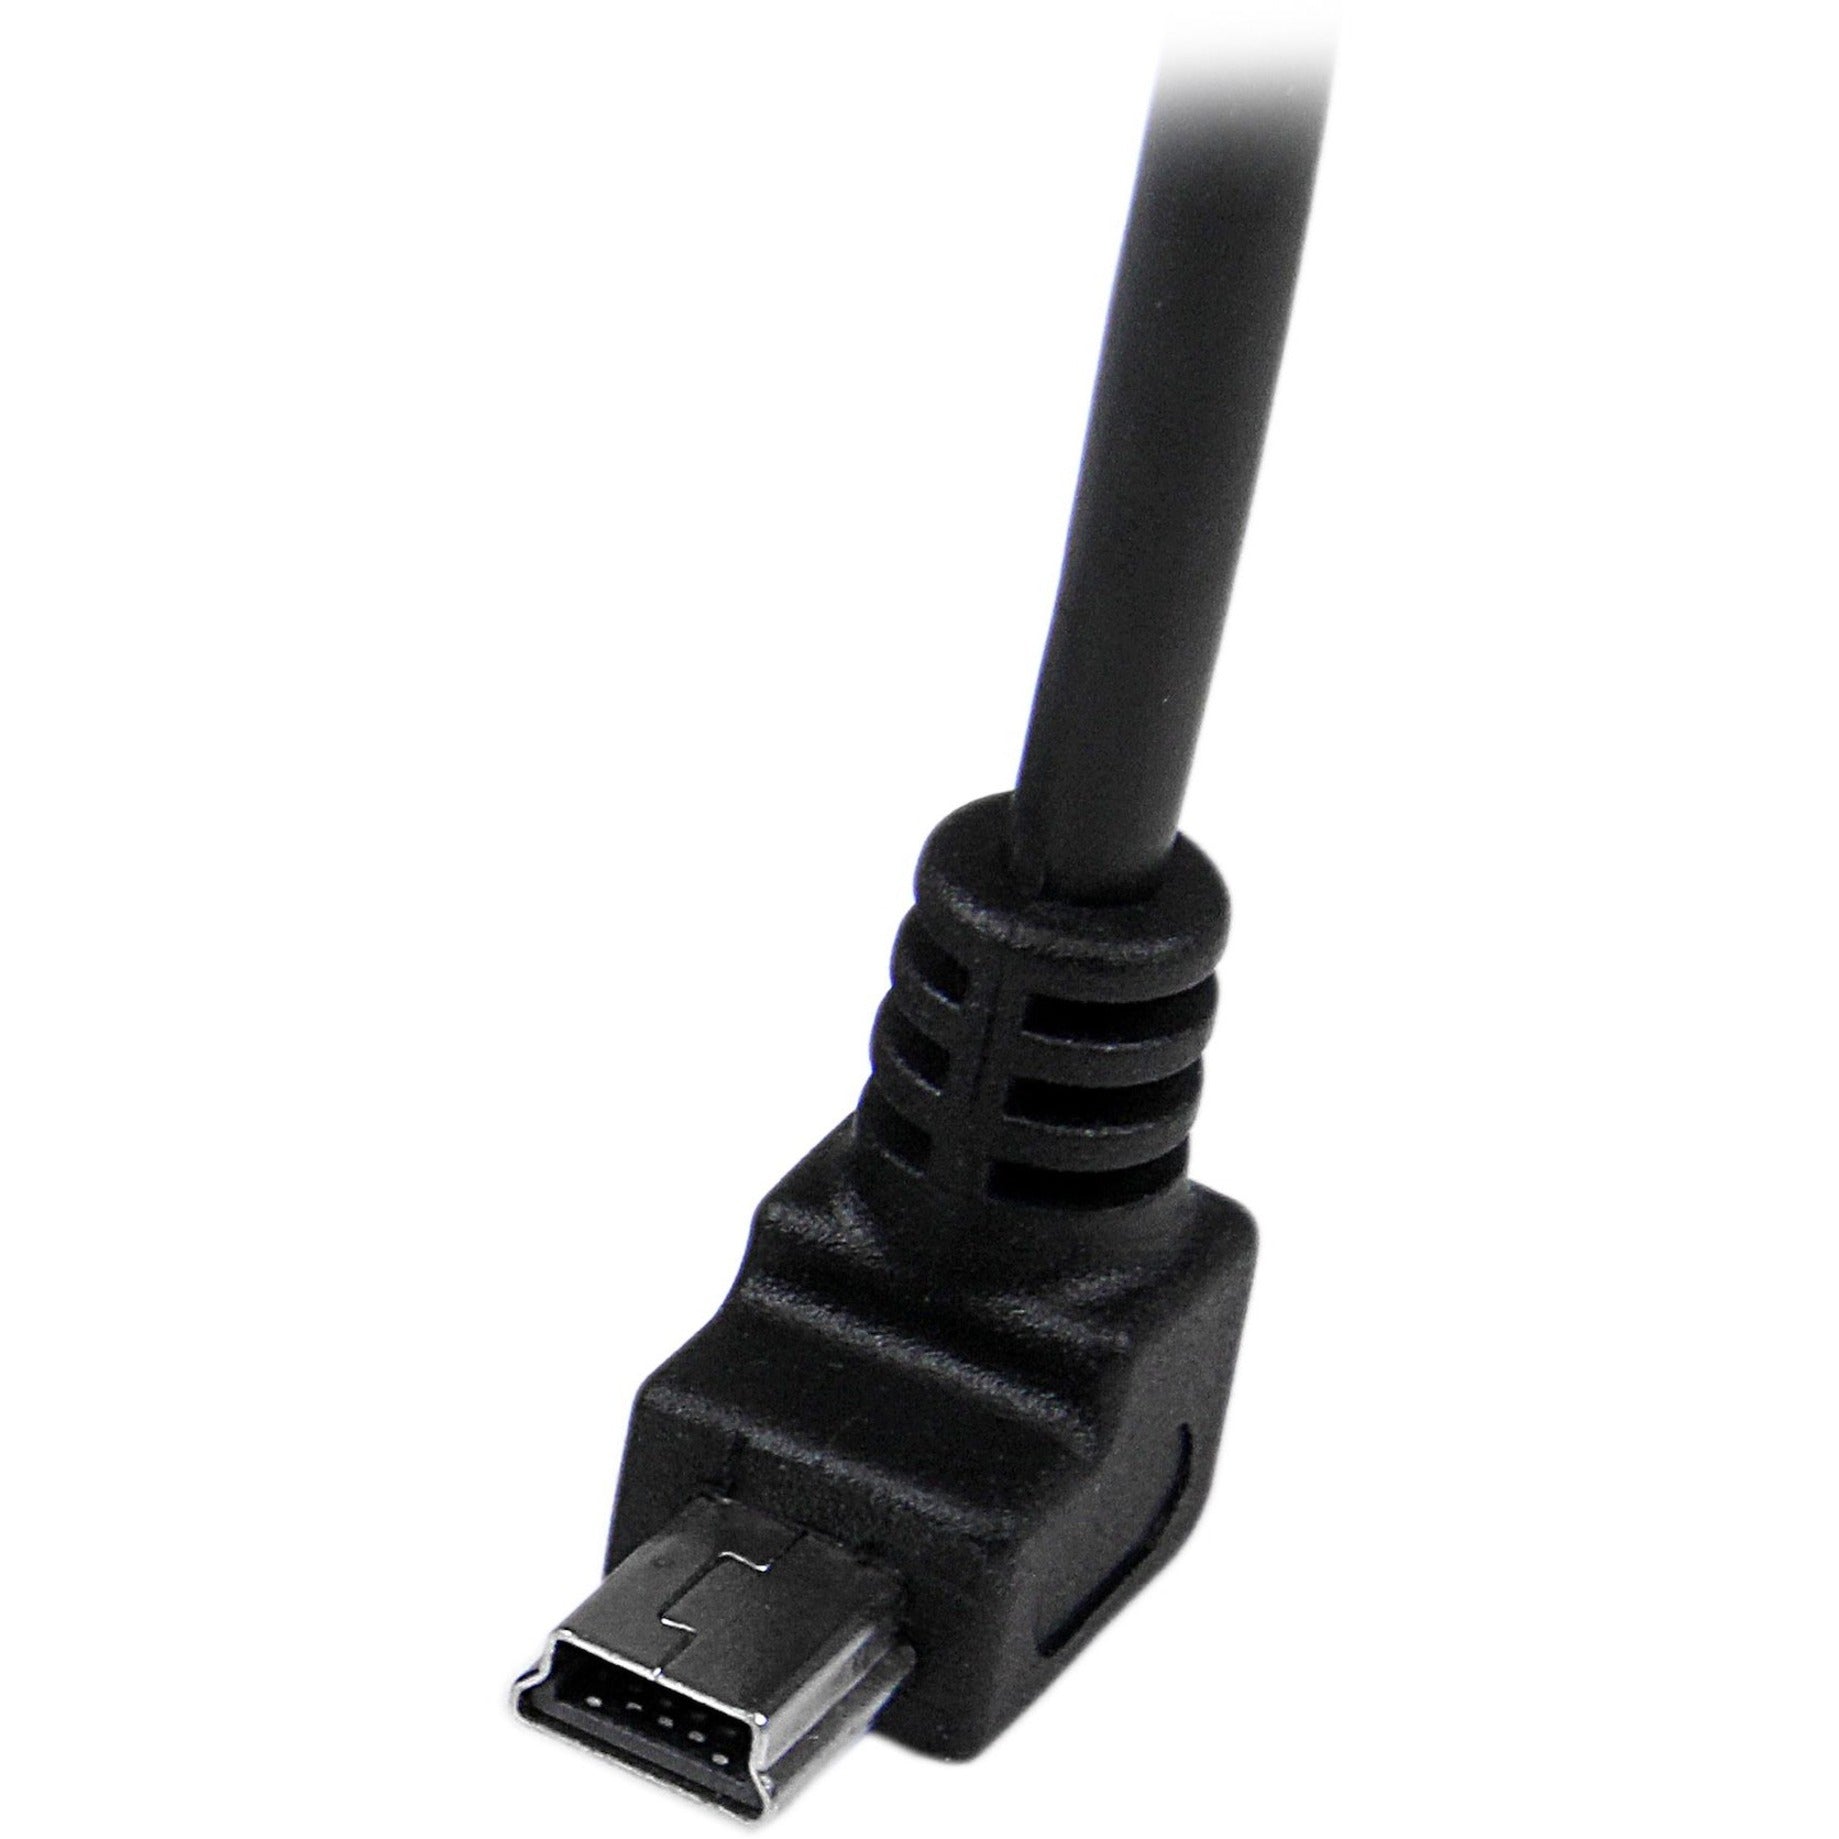 StarTech.com USBAMB2MD 2m Mini USB Cable - A to Down Angle Mini B, Strain Relief, Molded, 480 Mbit/s Data Transfer Rate